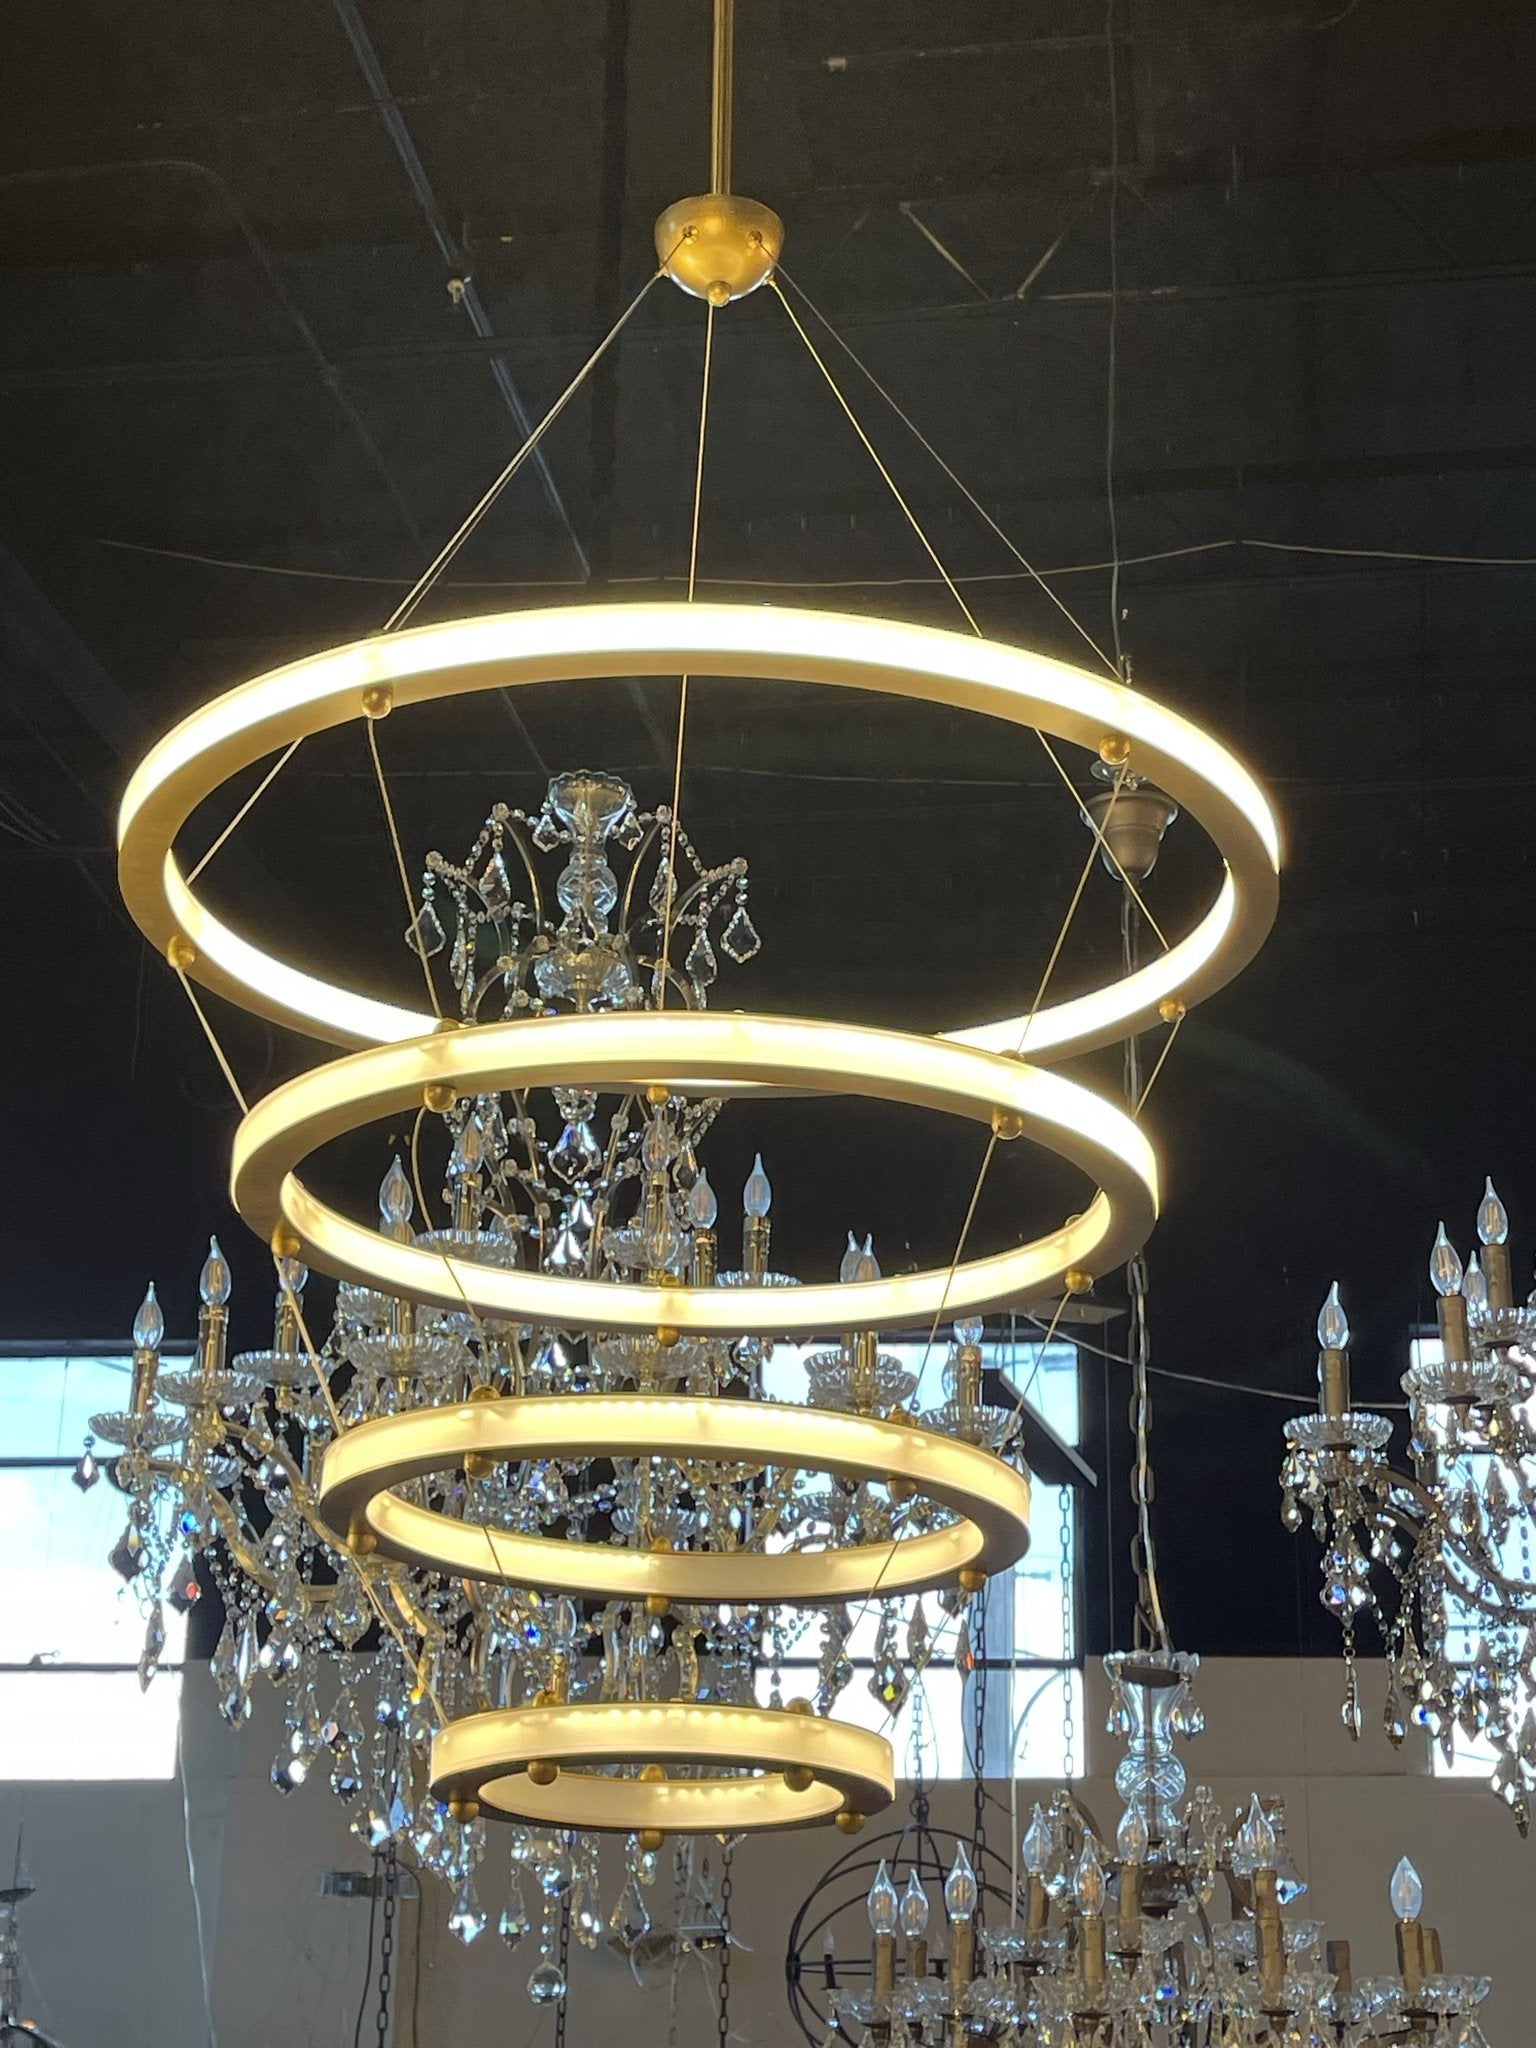 Ogee Arch 4-Ring LED Chandelier - Italian Concept